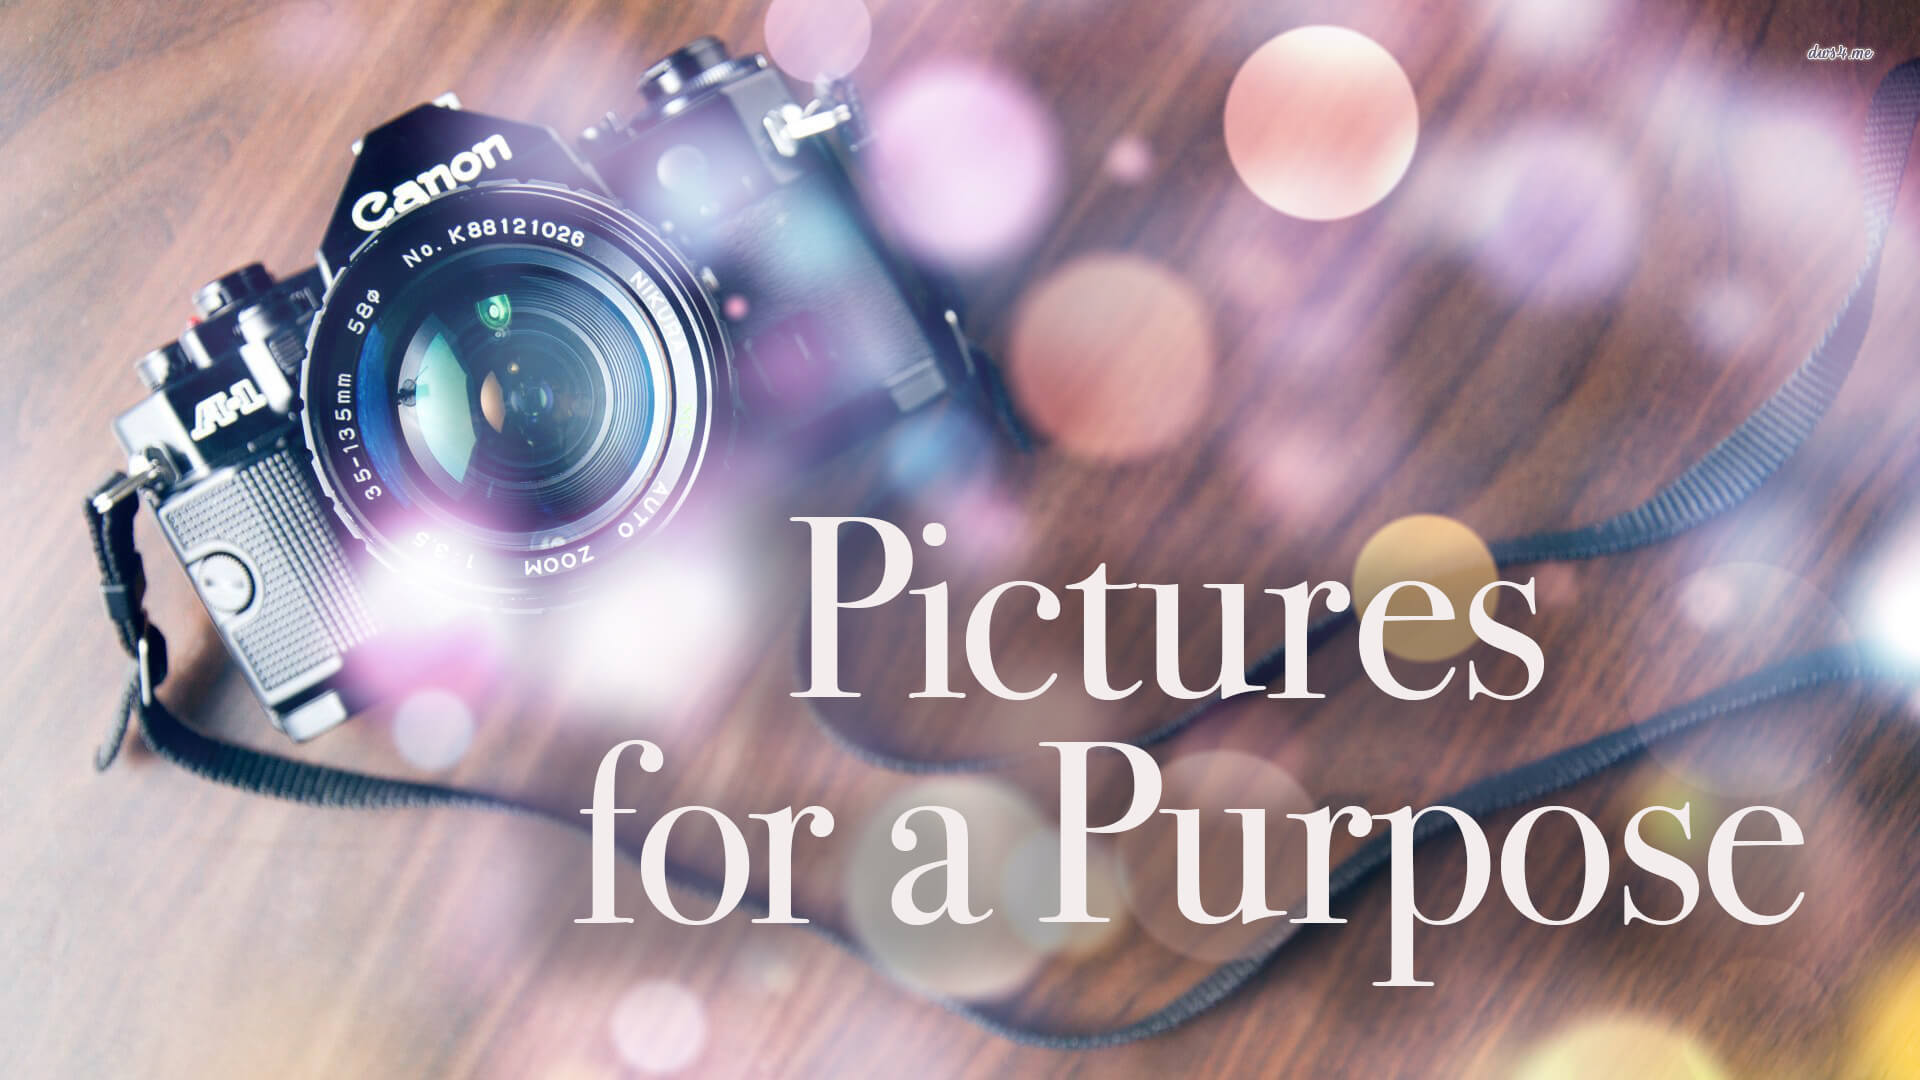 Pictures for a Purpose – November 17, 2018